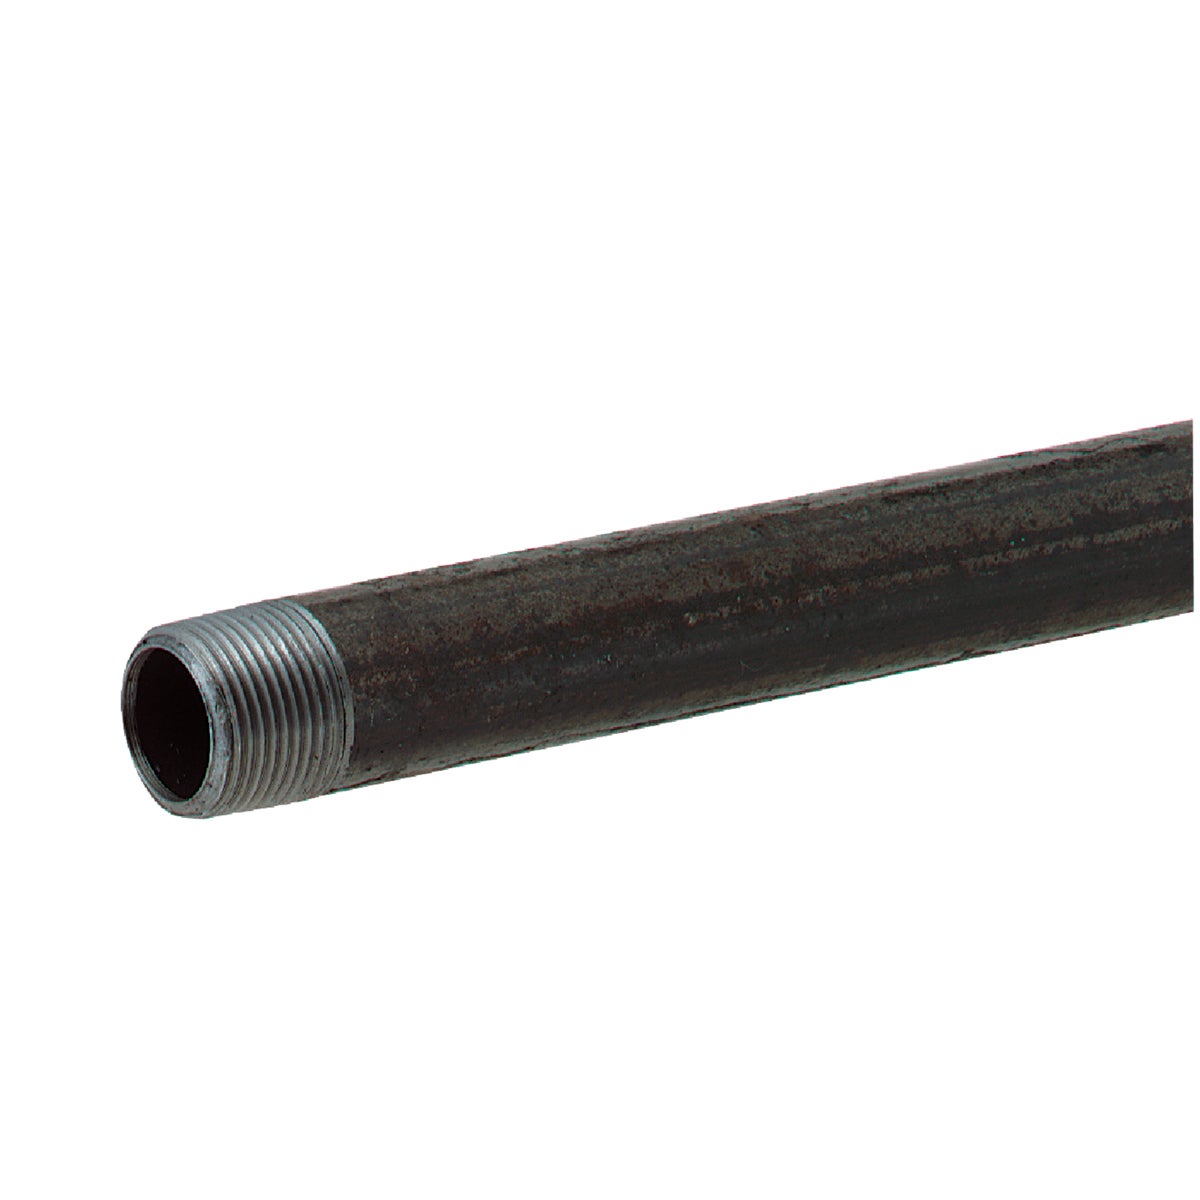 1-1/2X18 BLK RDI-CT PIPE